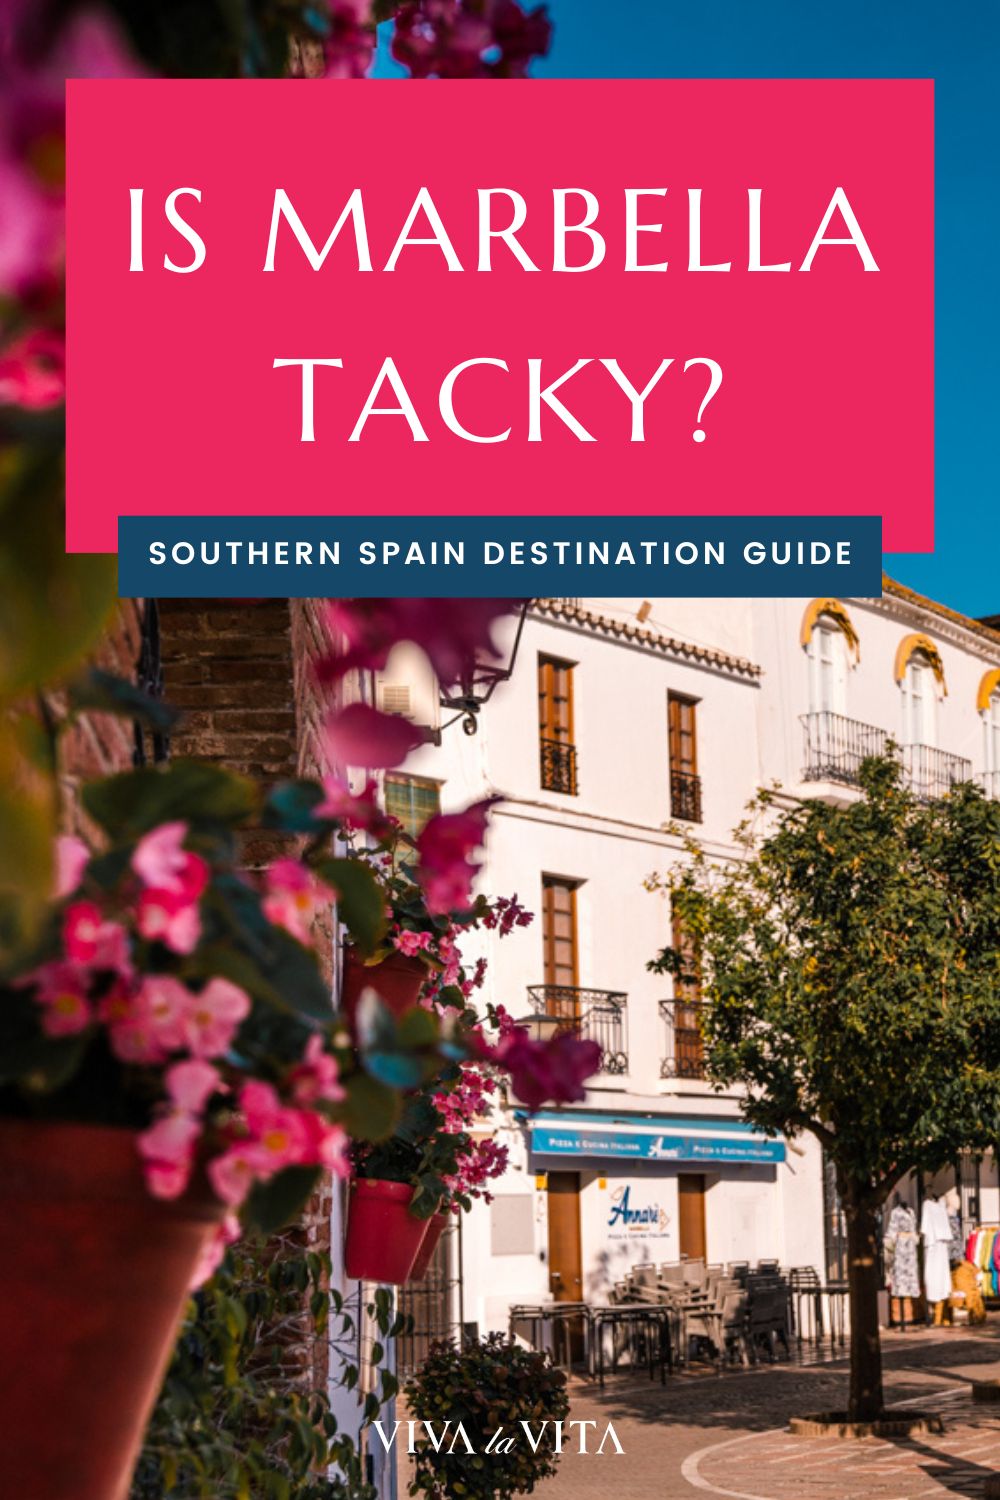 pinterest image with traditional andalusian houses and flowers in Marbella old town showing a headline - is marbella tacky?